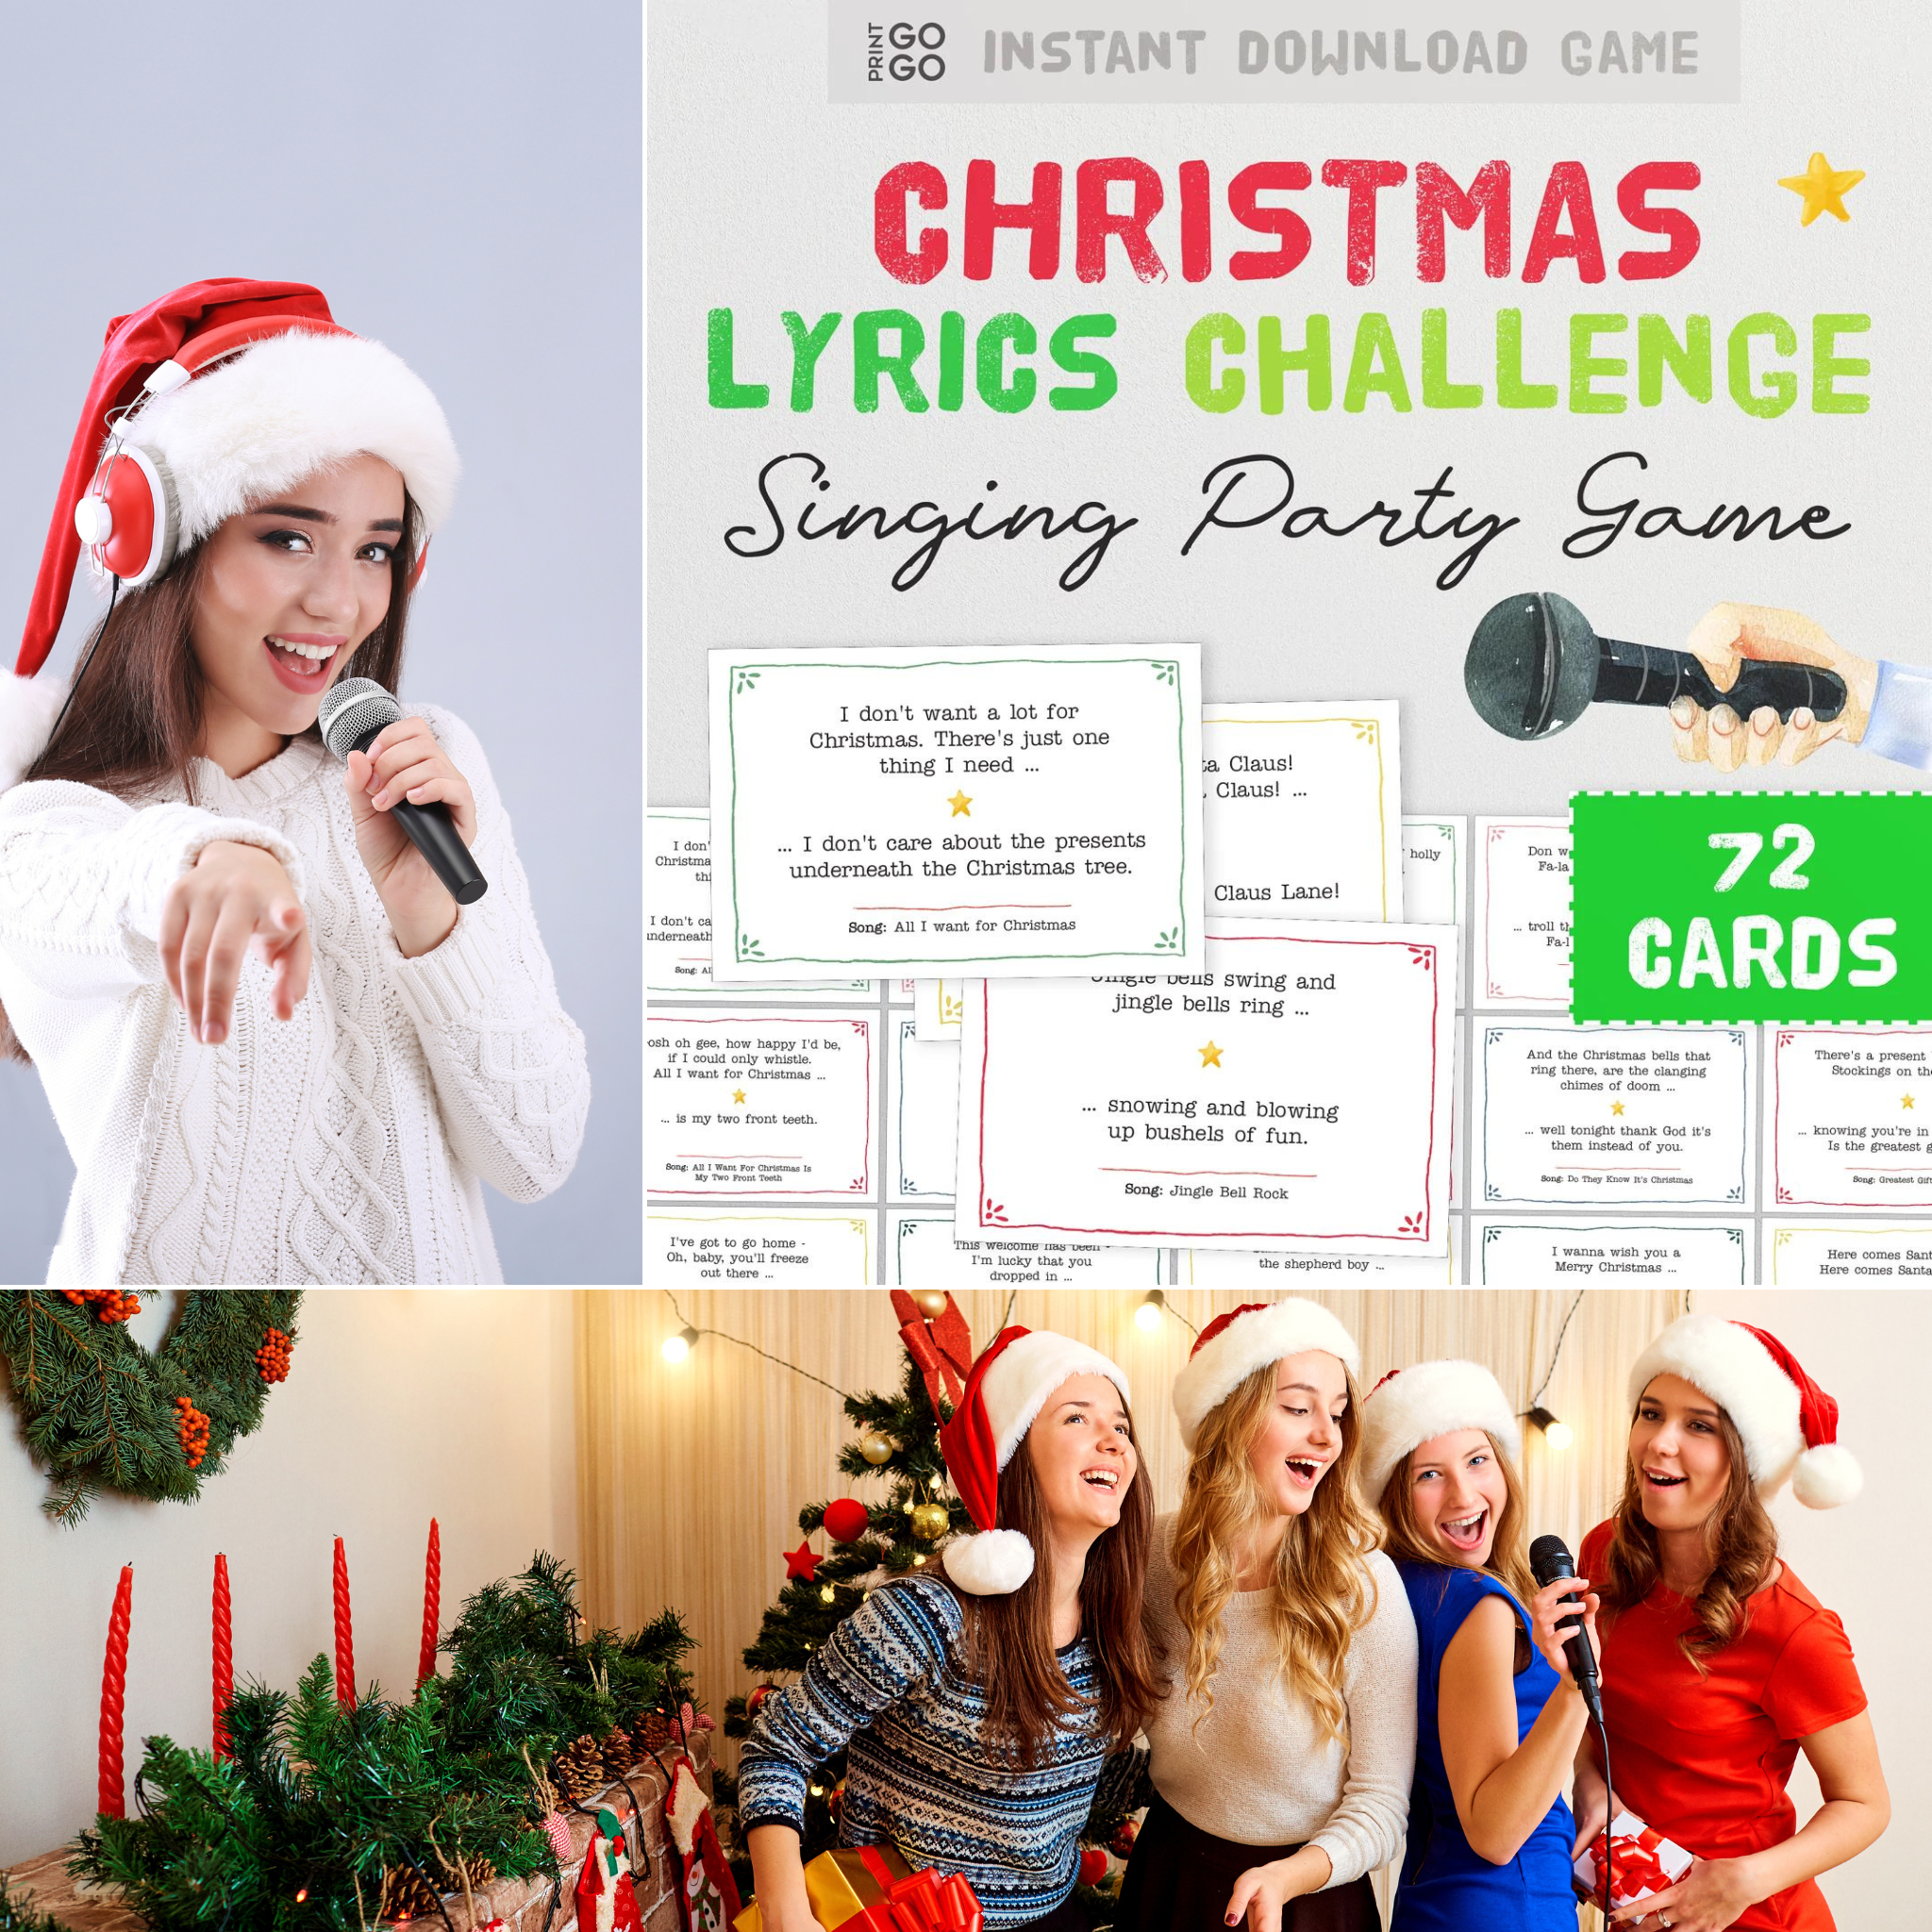 Christmas Lyrics Challenge Game - The Quick Thinking and Singing Family Party Game